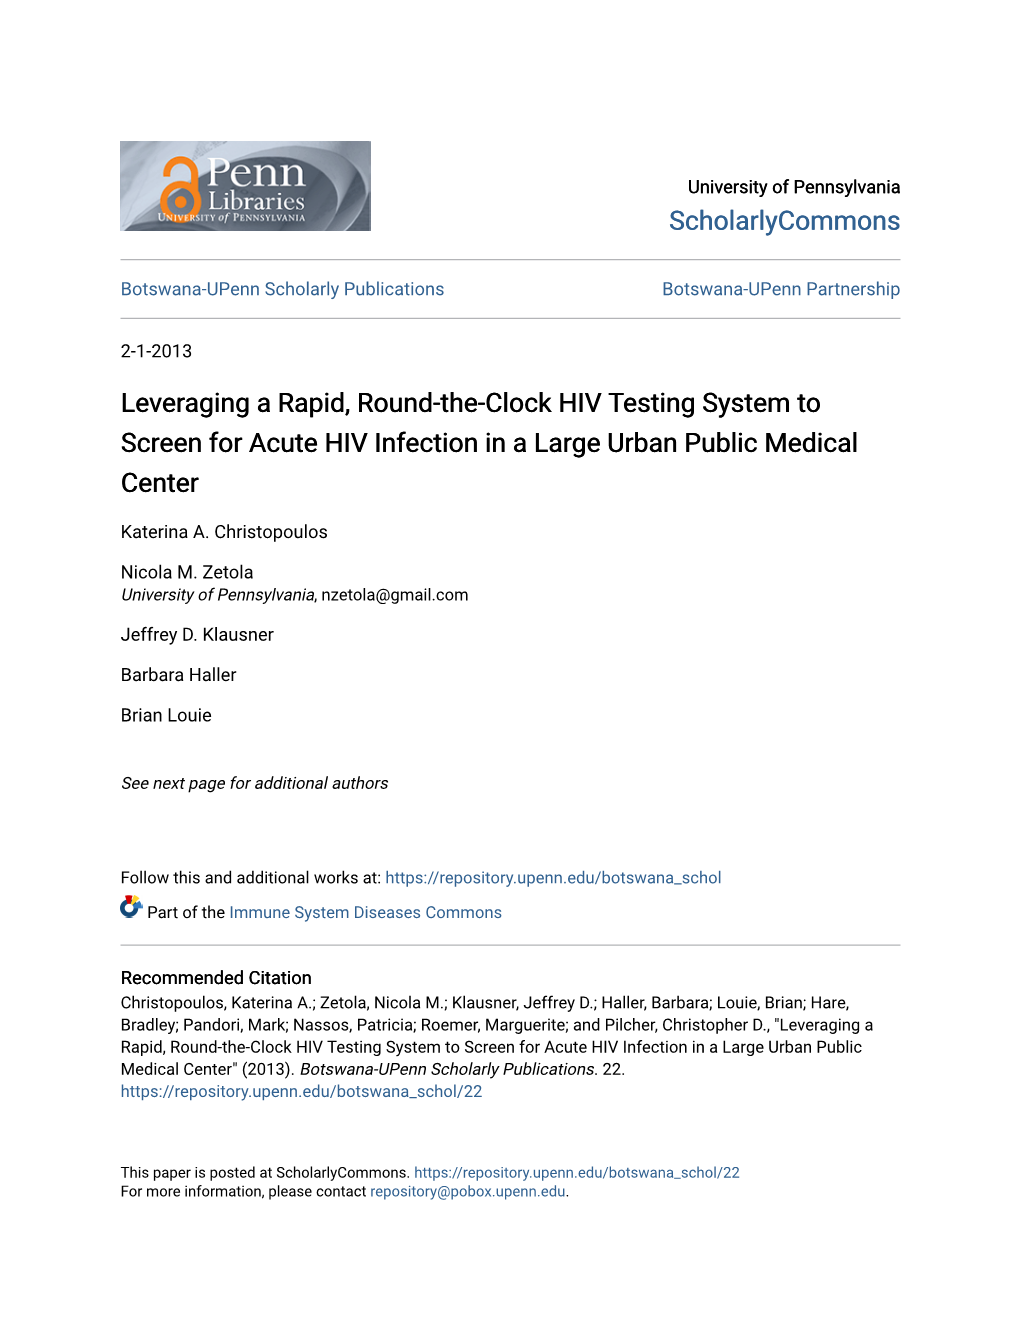 Leveraging a Rapid, Round-The-Clock HIV Testing System to Screen for Acute HIV Infection in a Large Urban Public Medical Center